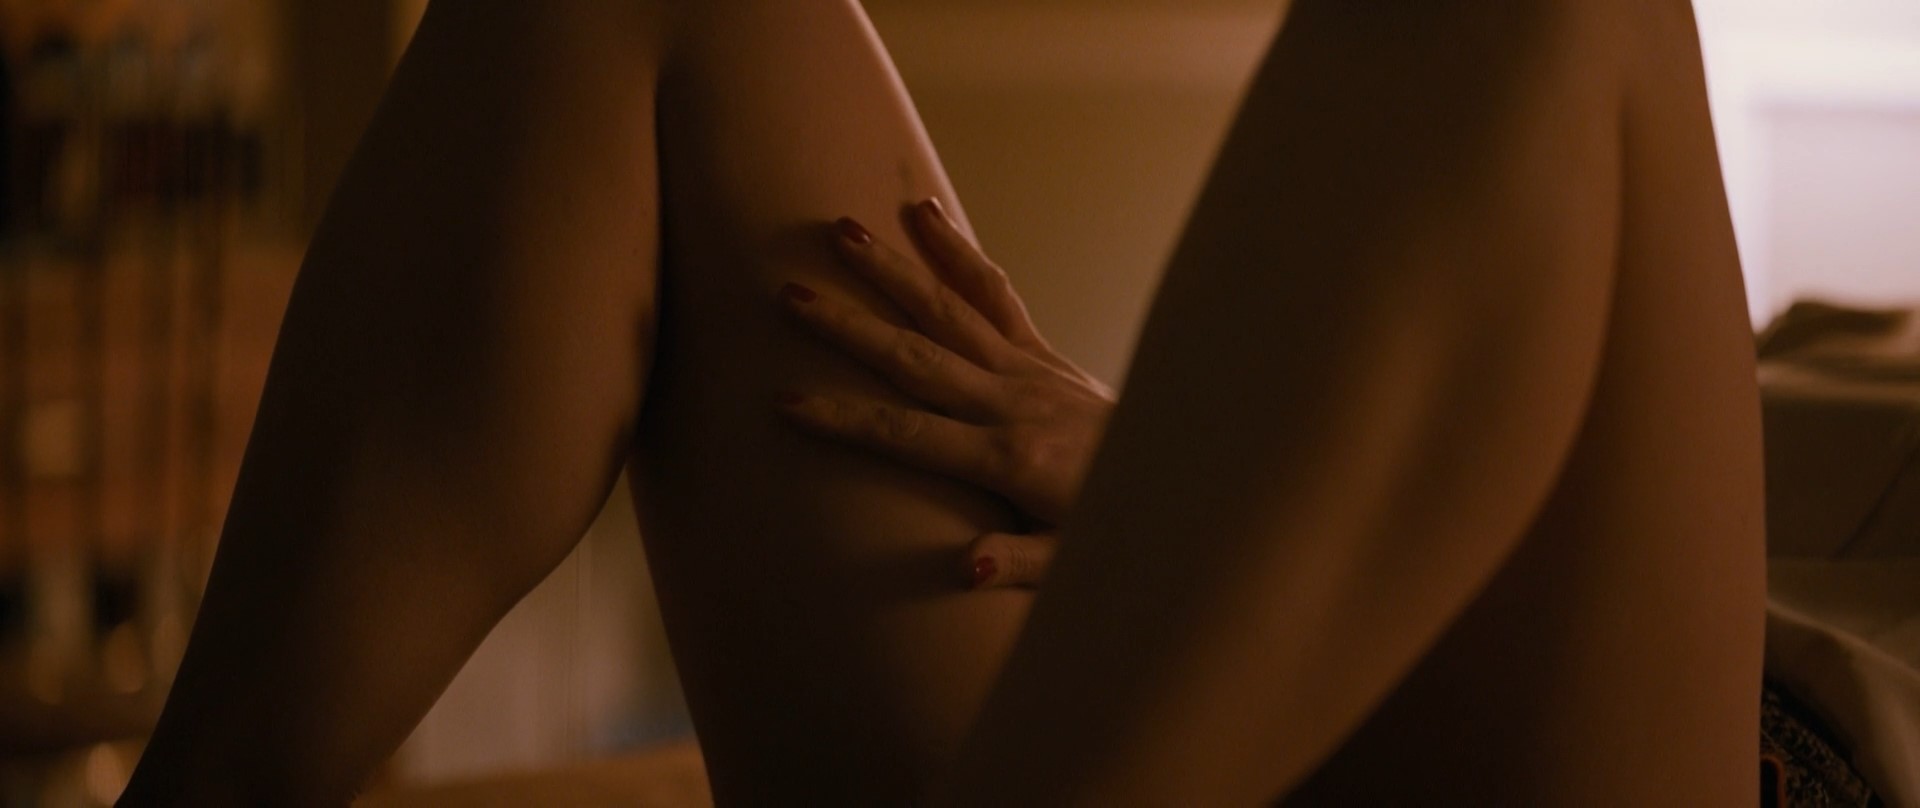 Valorie curry sex